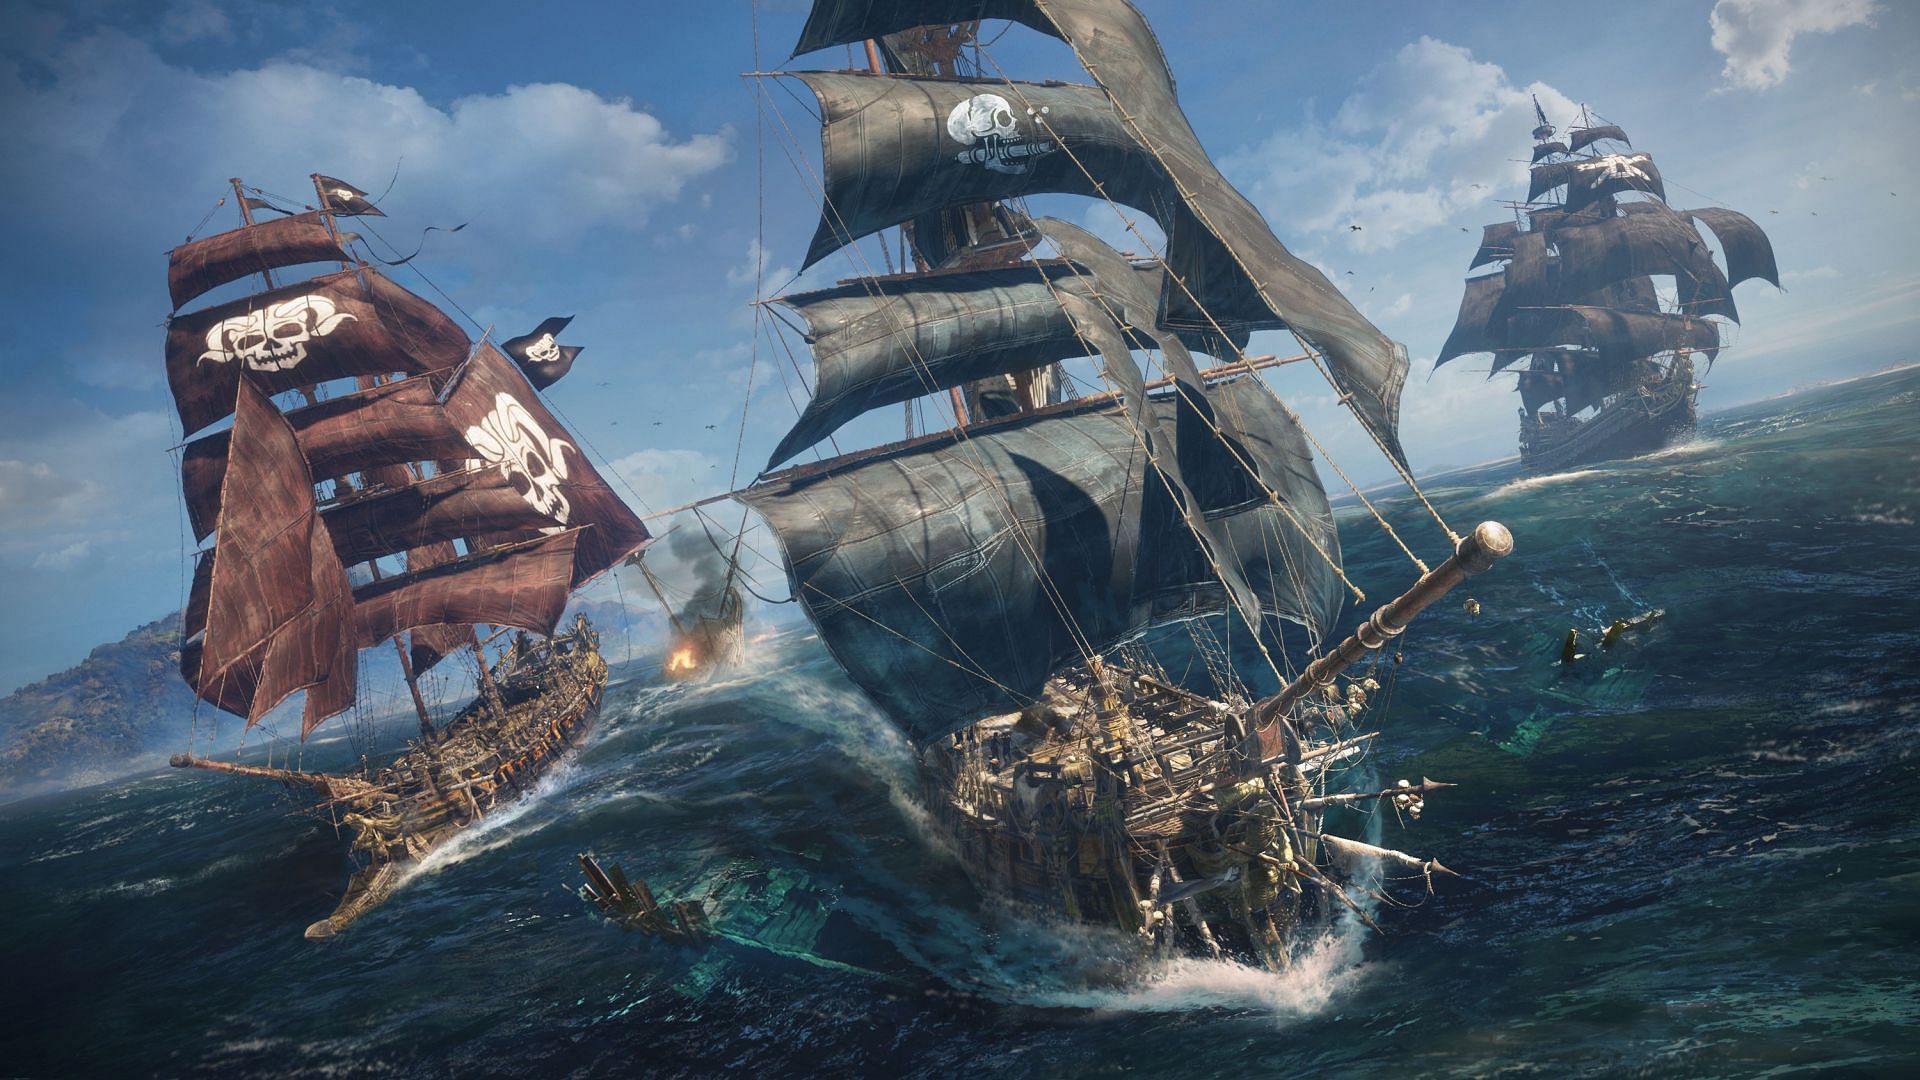 Look out! Pirate ships! (Image via Skull and Bones/Ubisoft)